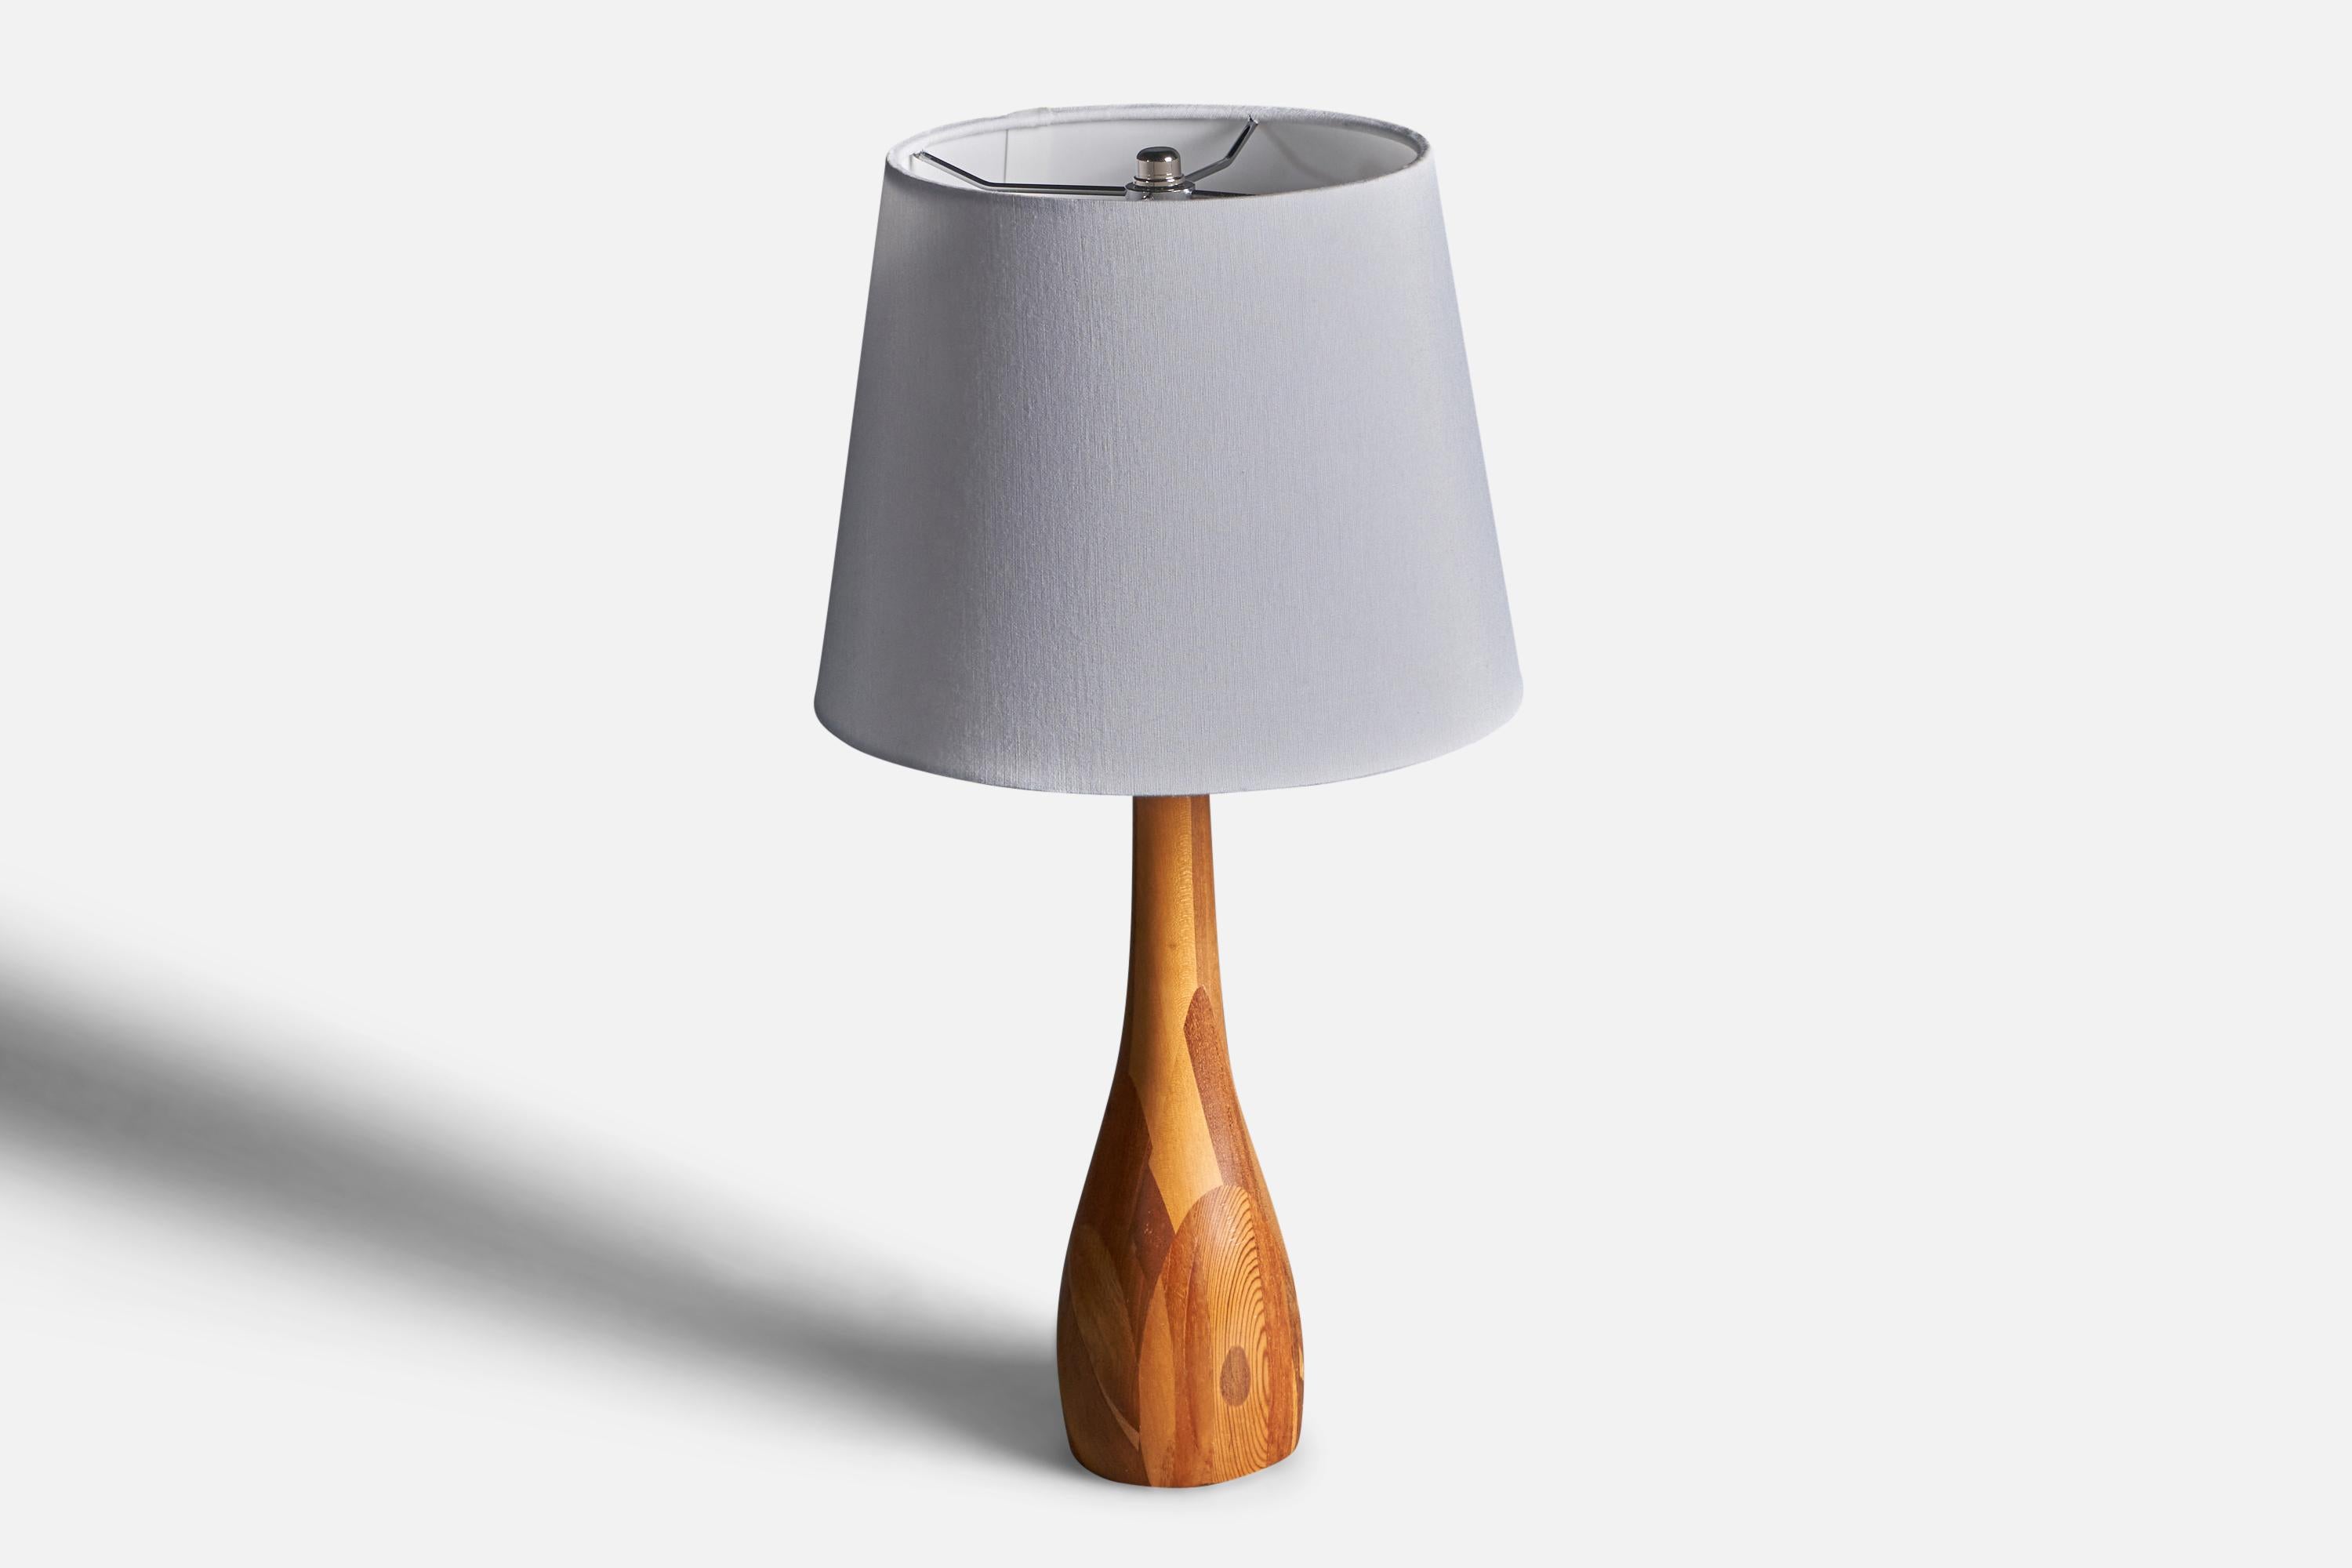 A table lamp. Designed and produced by unknown maker, Denmark, c. 1950s. Features solid woods such as pine, birch, walnut. Sold without lampshade.